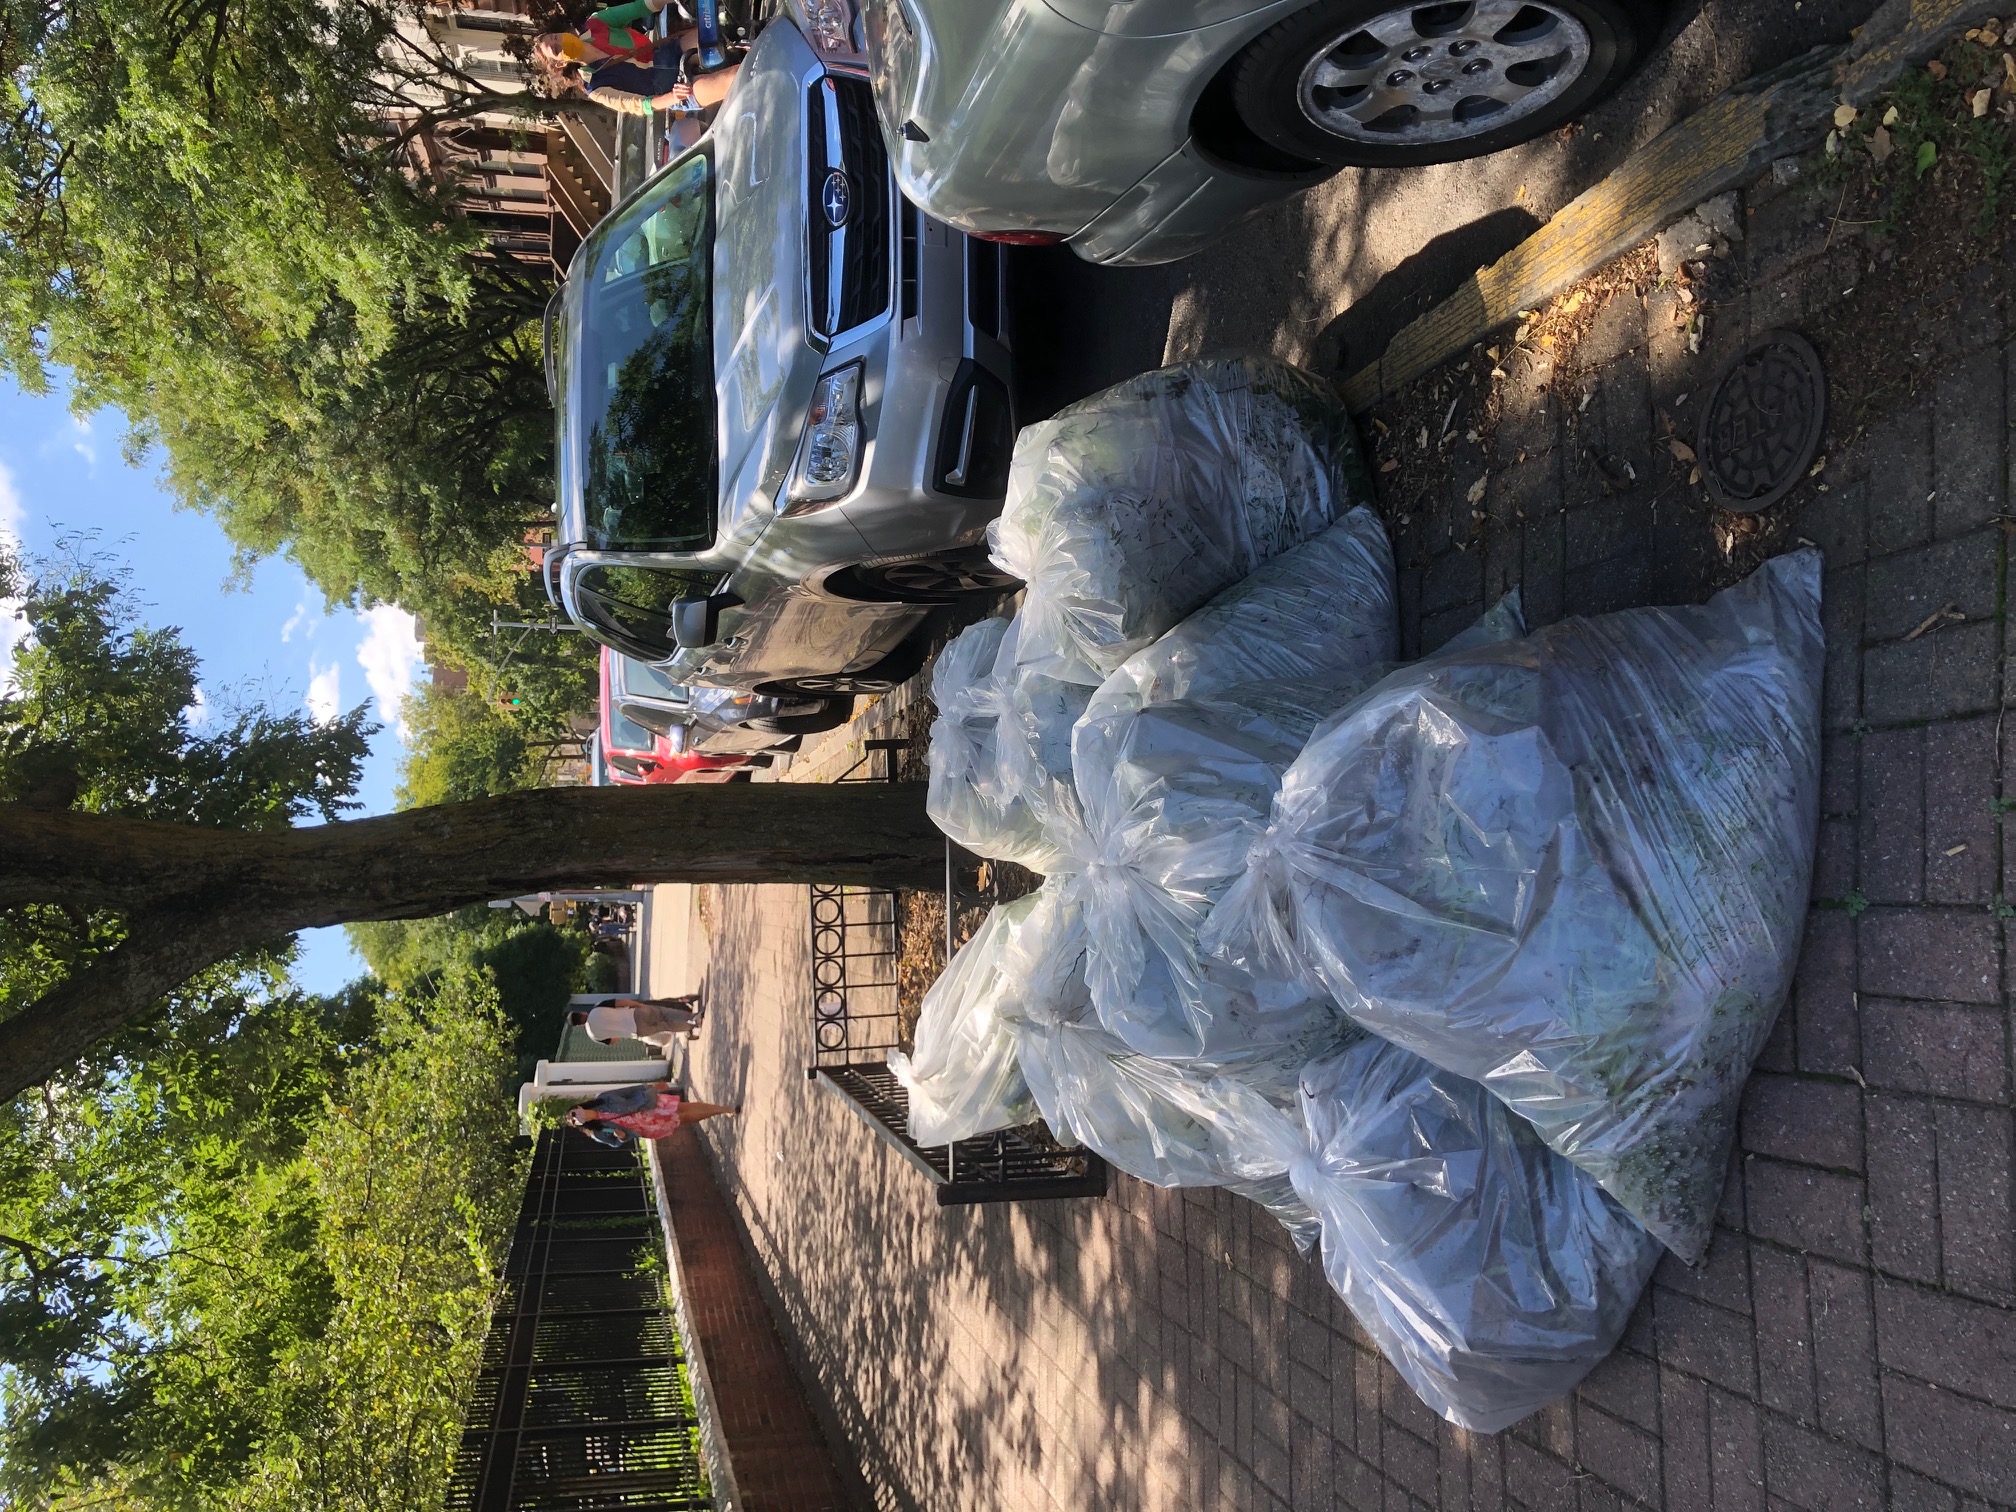 Underhill Playground - 4 10 bags of weeds ready for composting